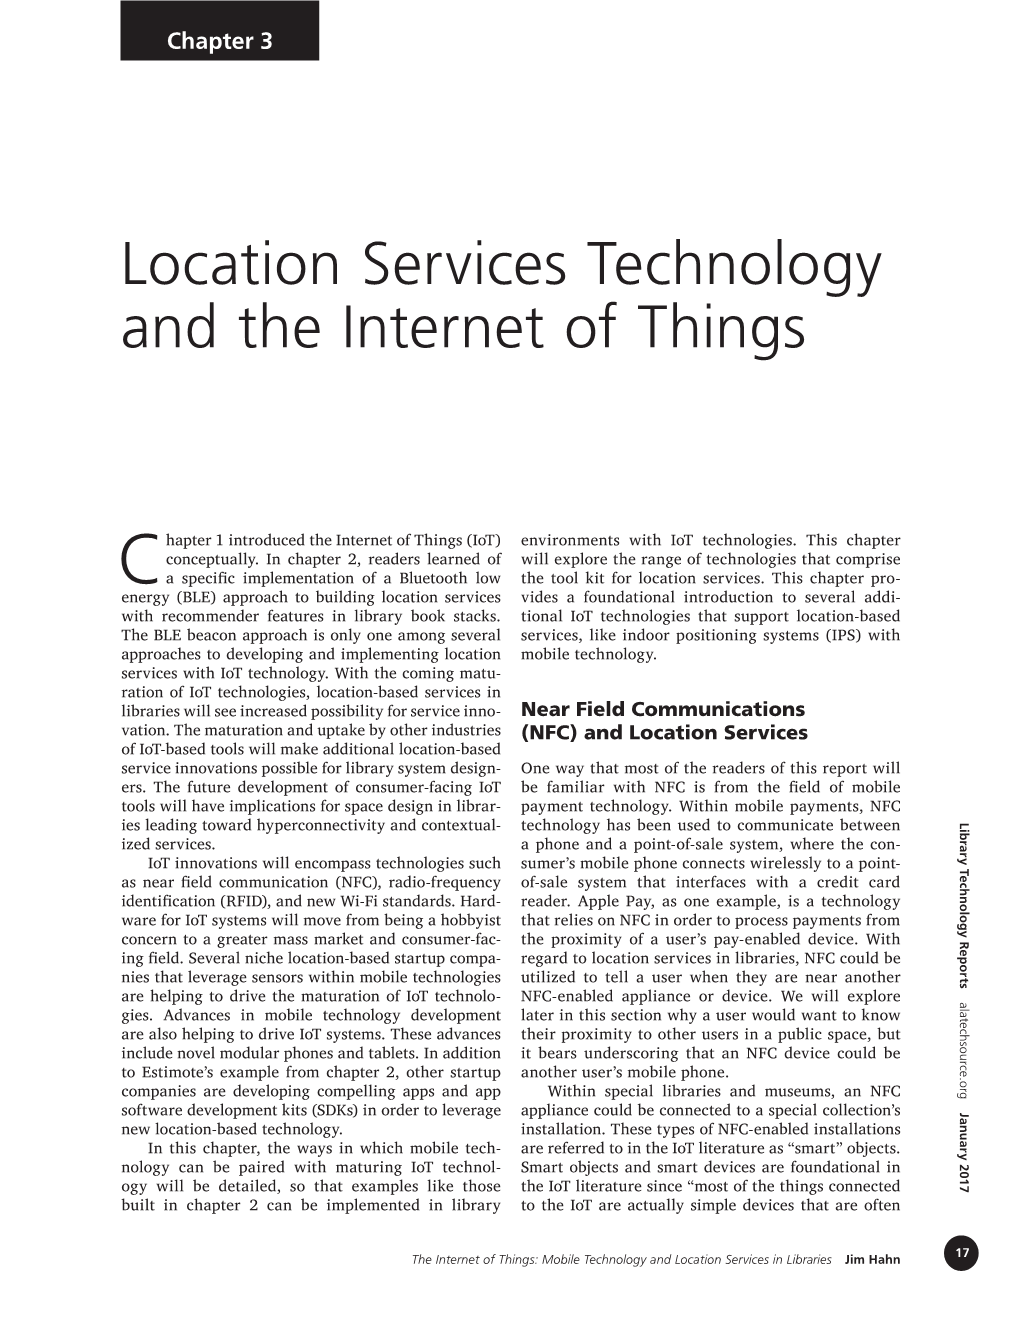 Location Services Technology and the Internet of Things